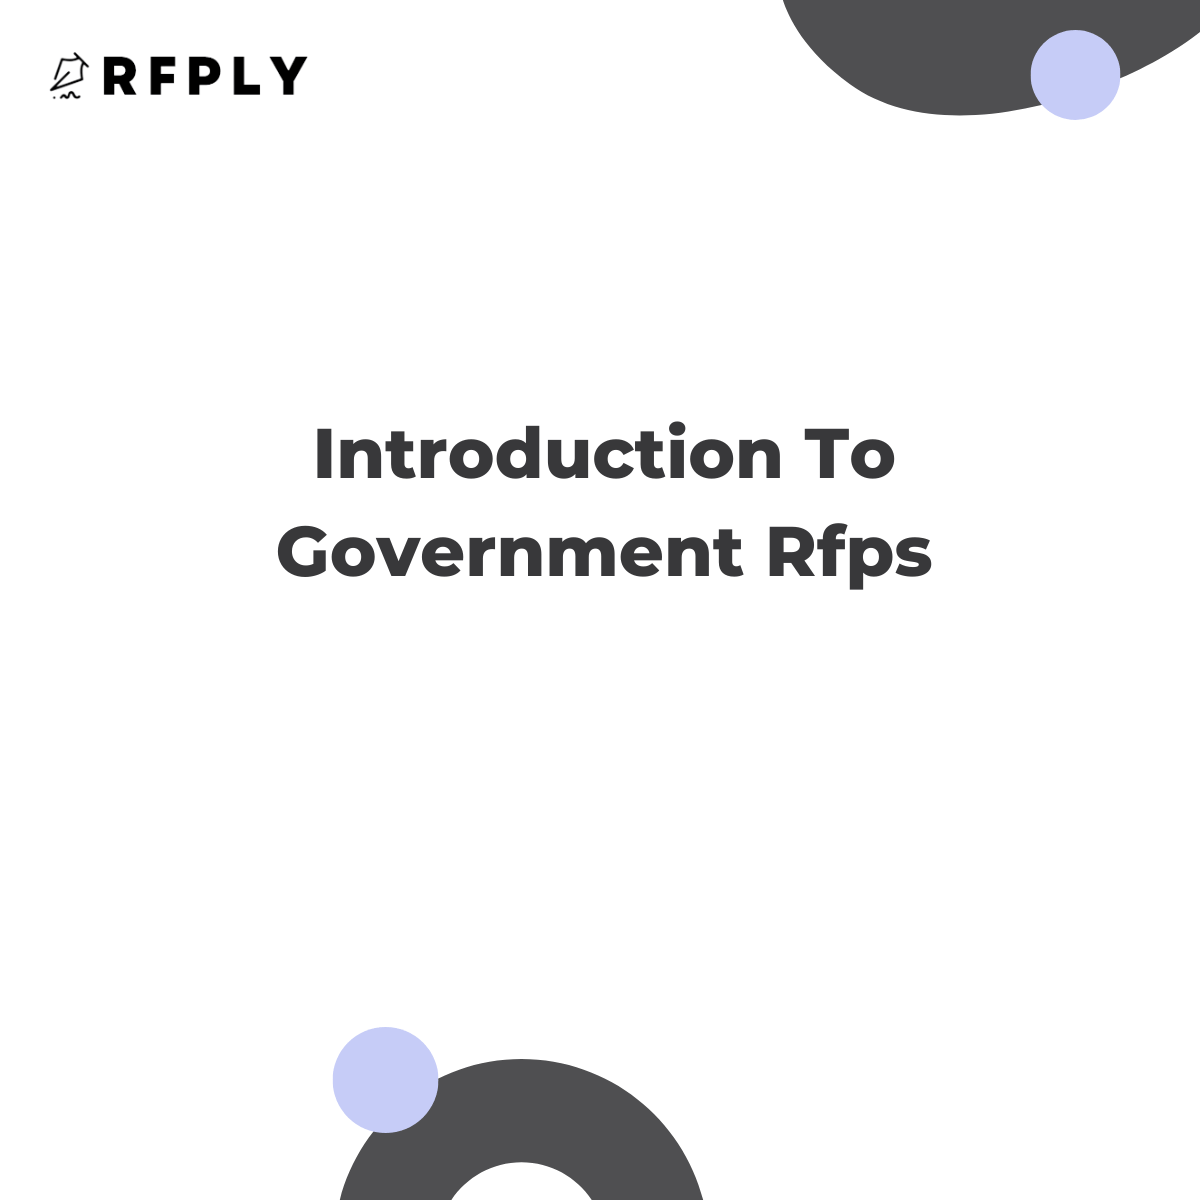 6 Government RFPs